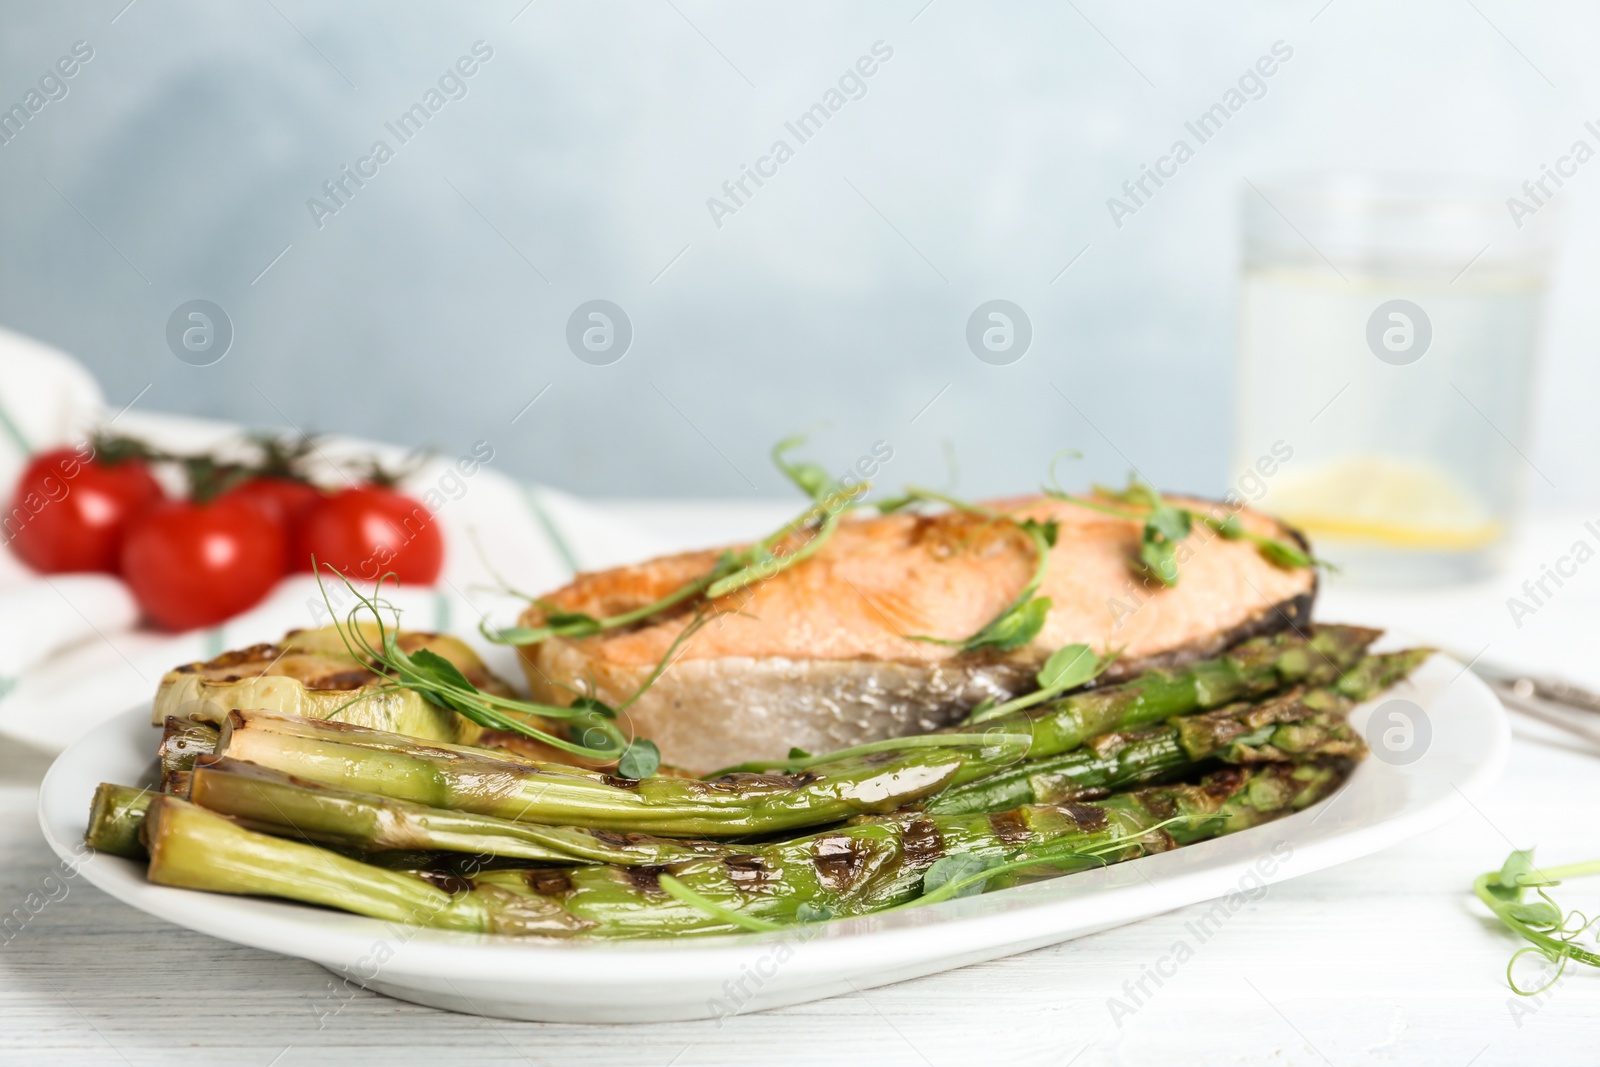 Photo of Tasty salmon steak served with grilled asparagus on plate